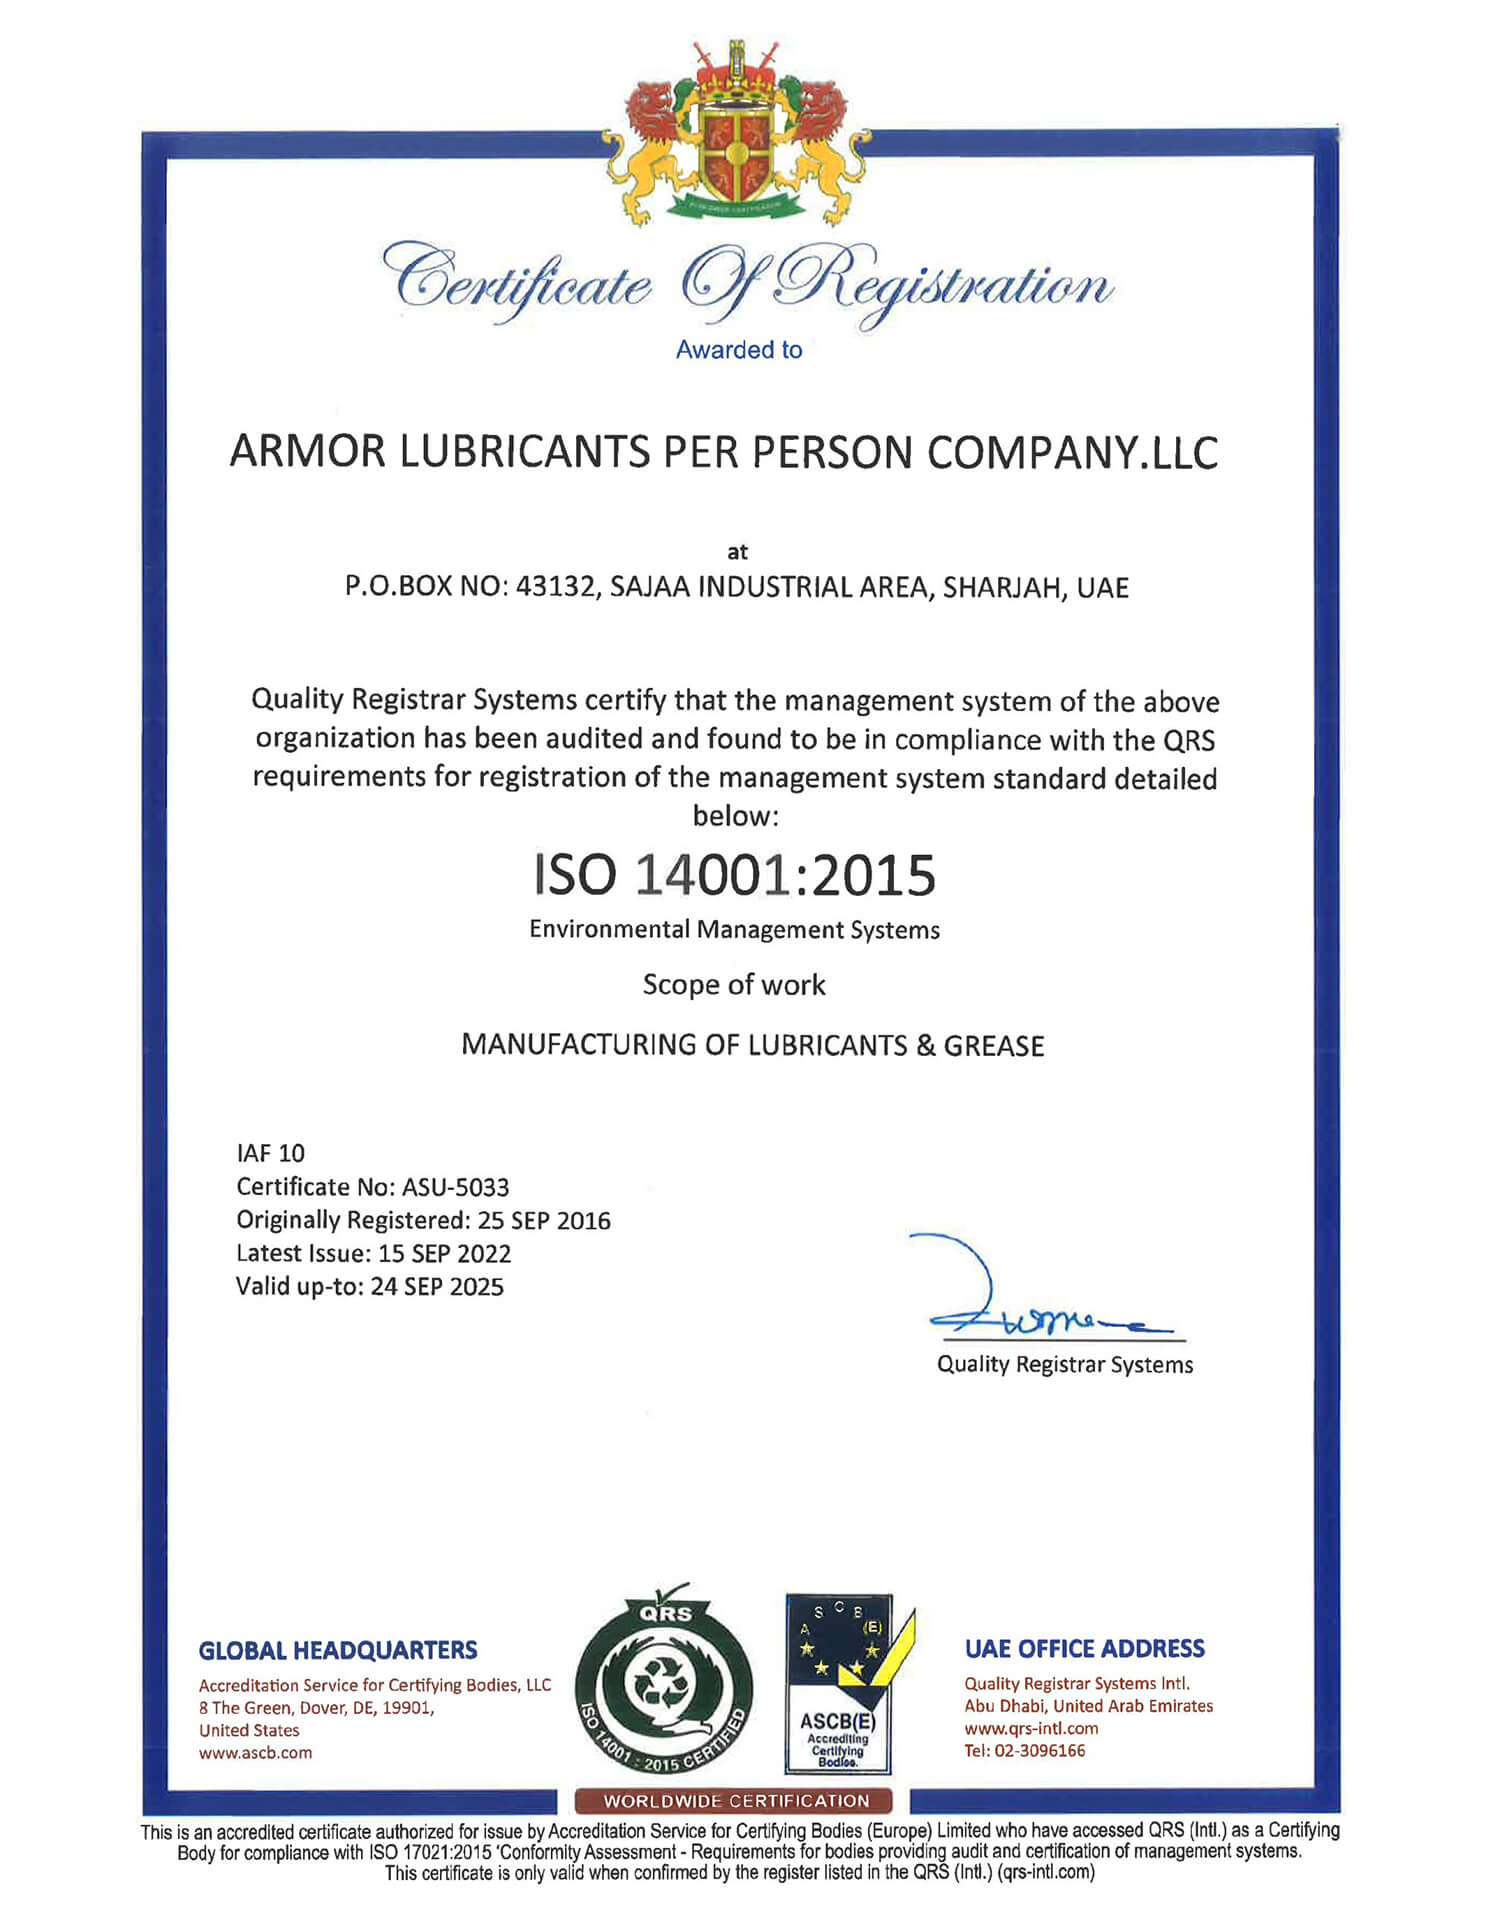 ISO 14001 Environmental Management Systems (EMS) Certification